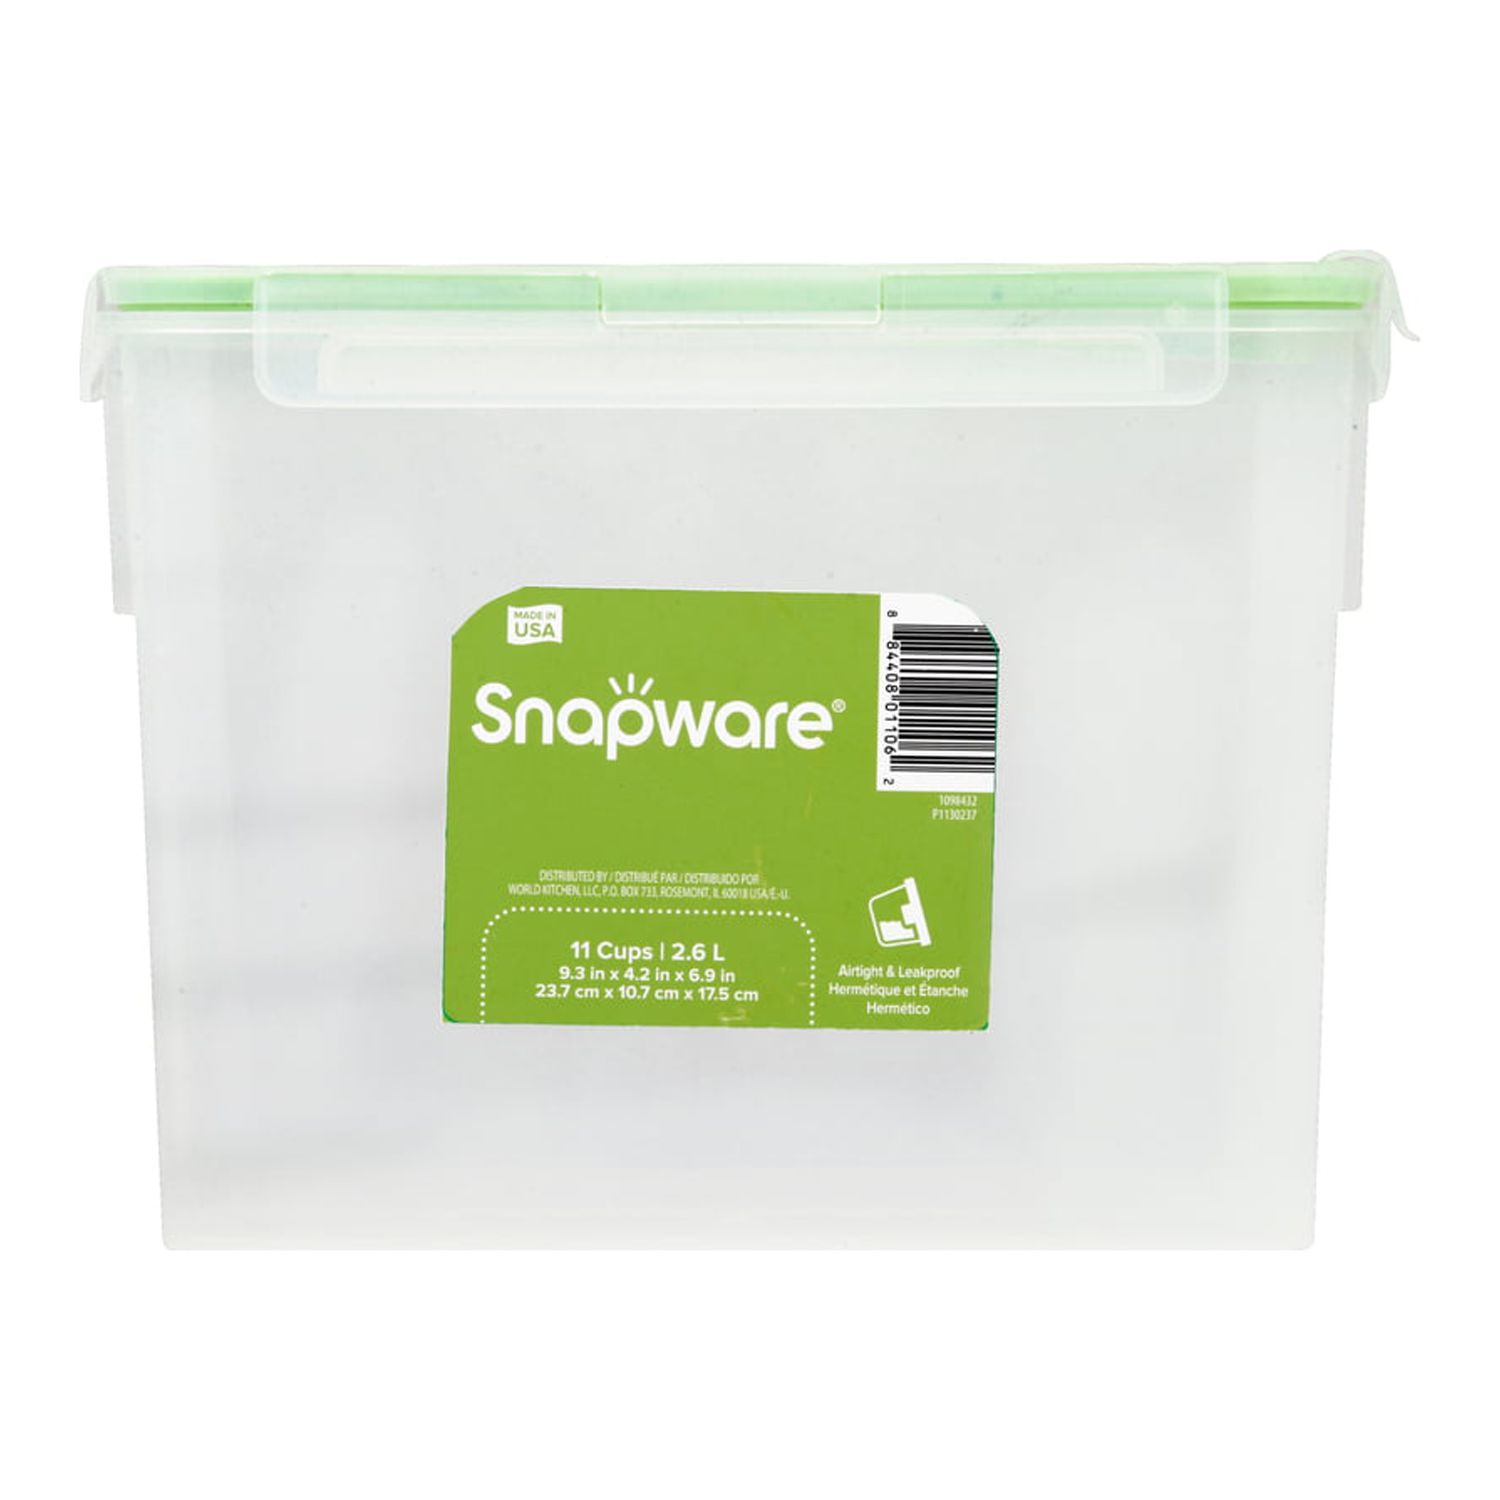 World Kitchen, Snapware 11 Cups Food Storage Container, 1 container - image 1 of 1